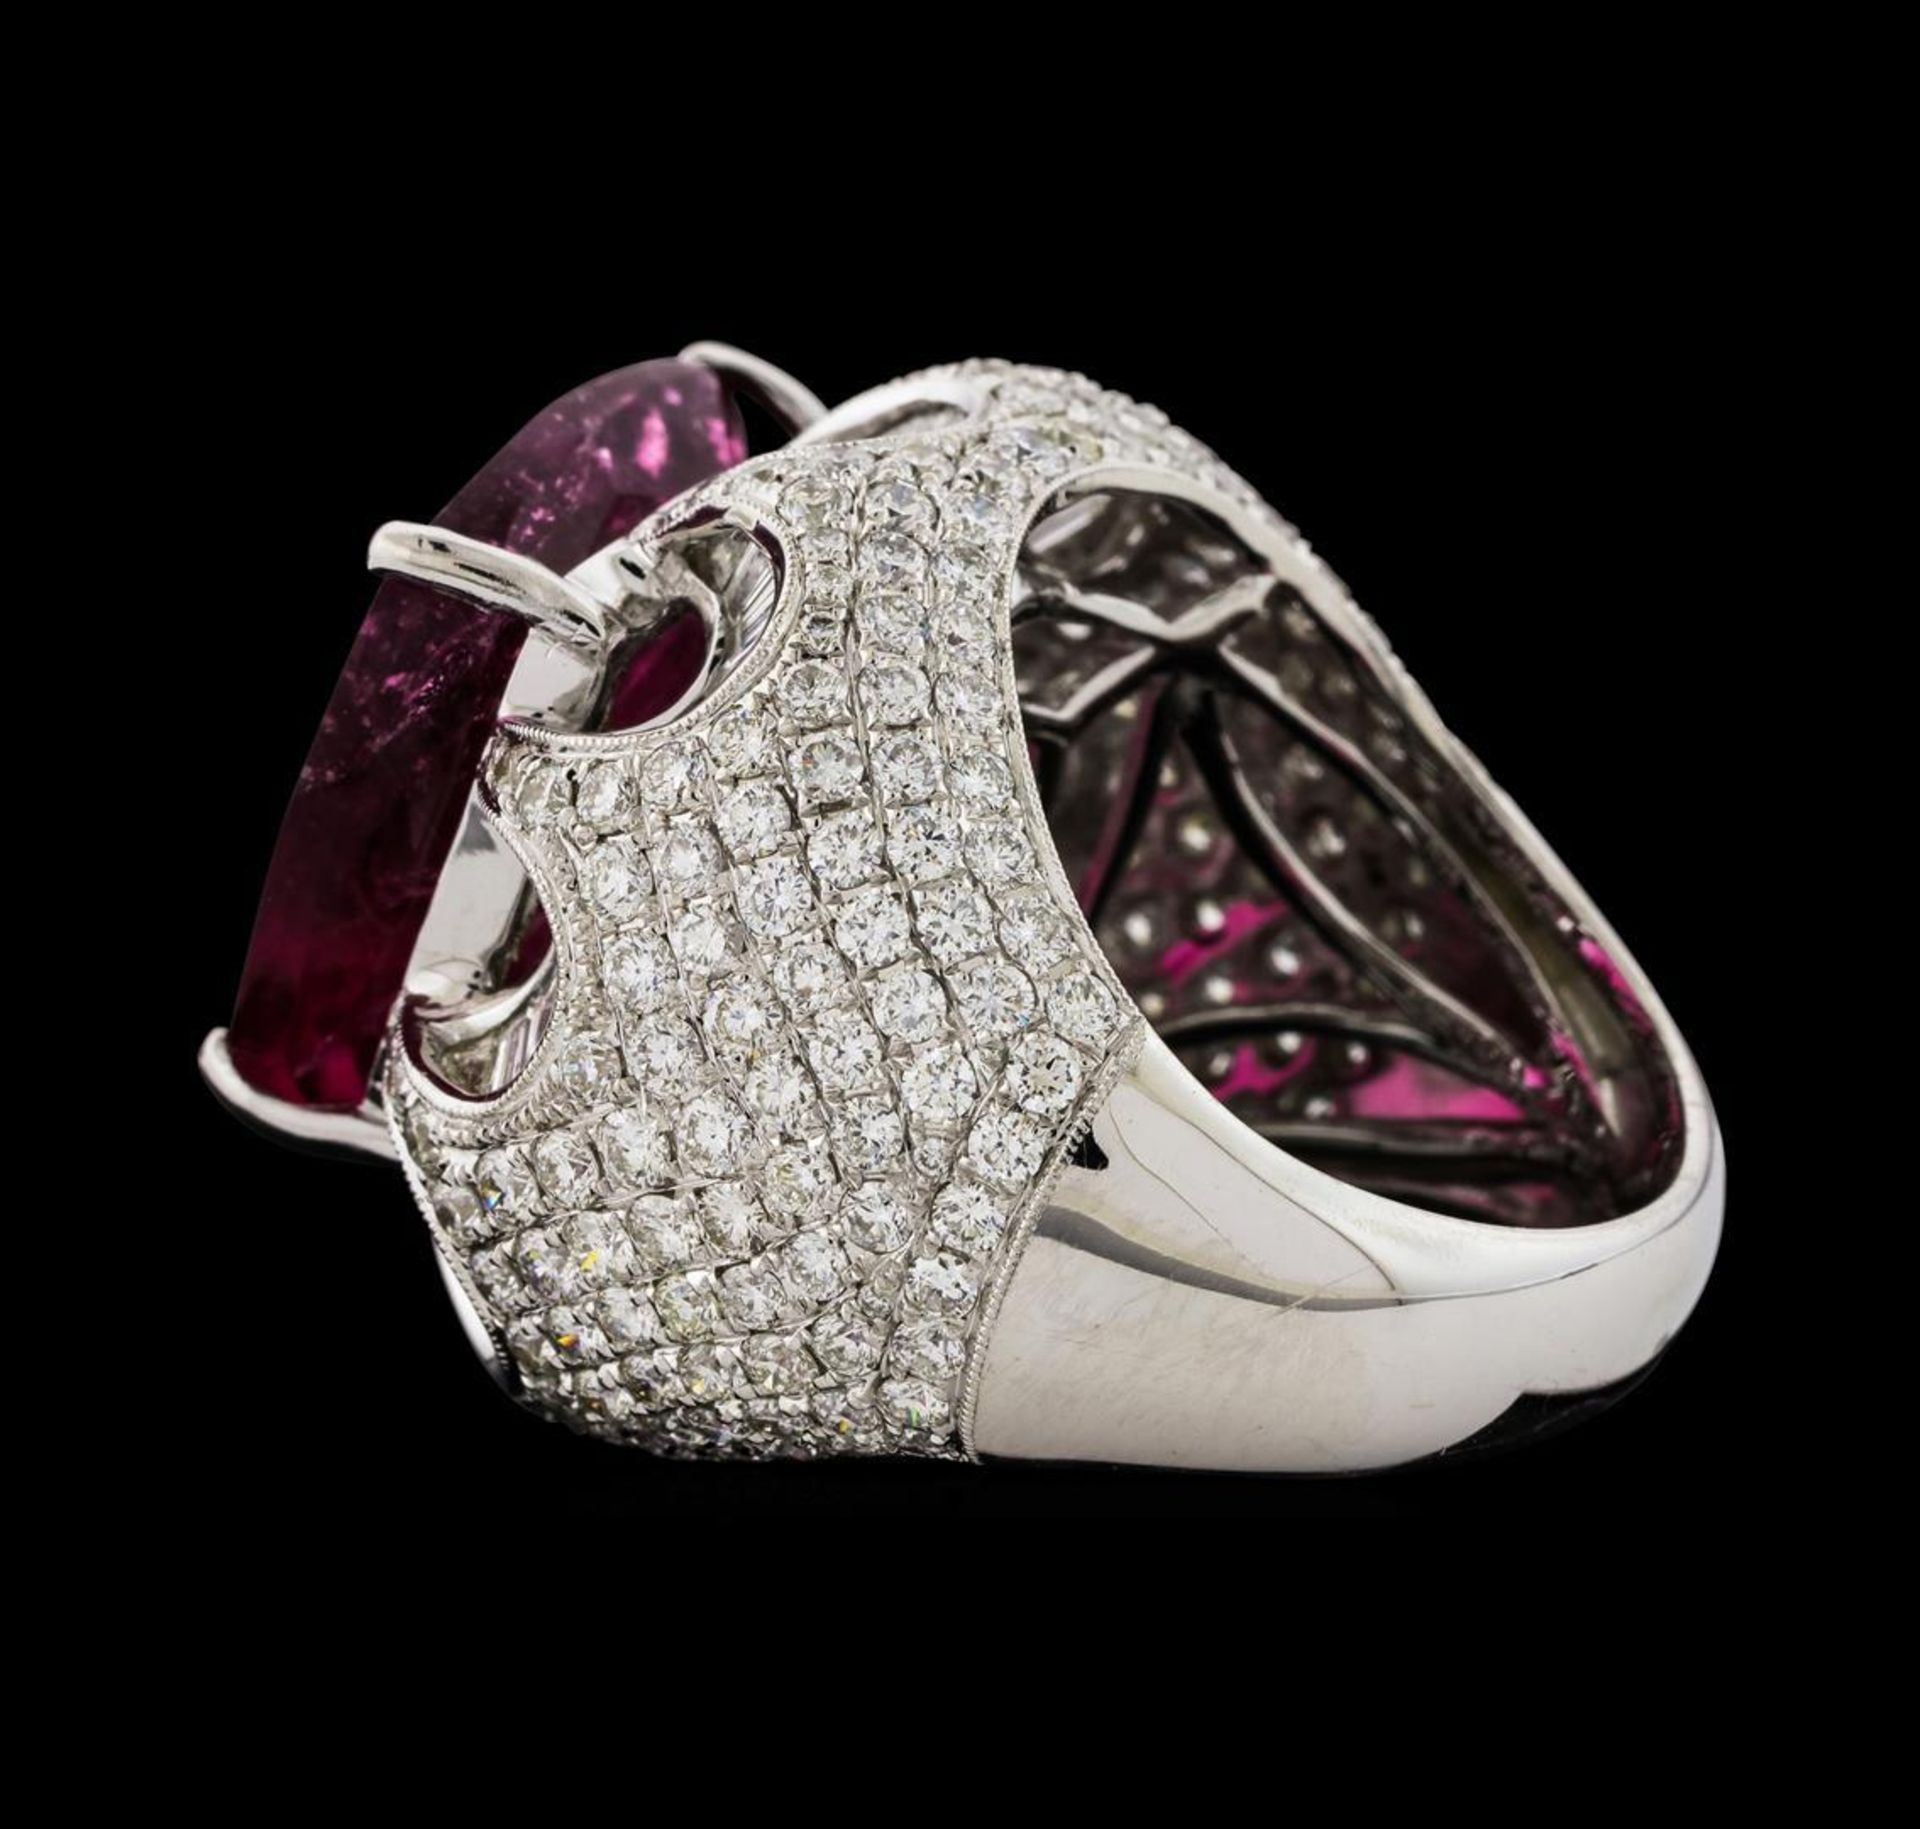 17.68 ctw Pink Tourmaline and Diamond Ring - 18KT White Gold - Image 3 of 5